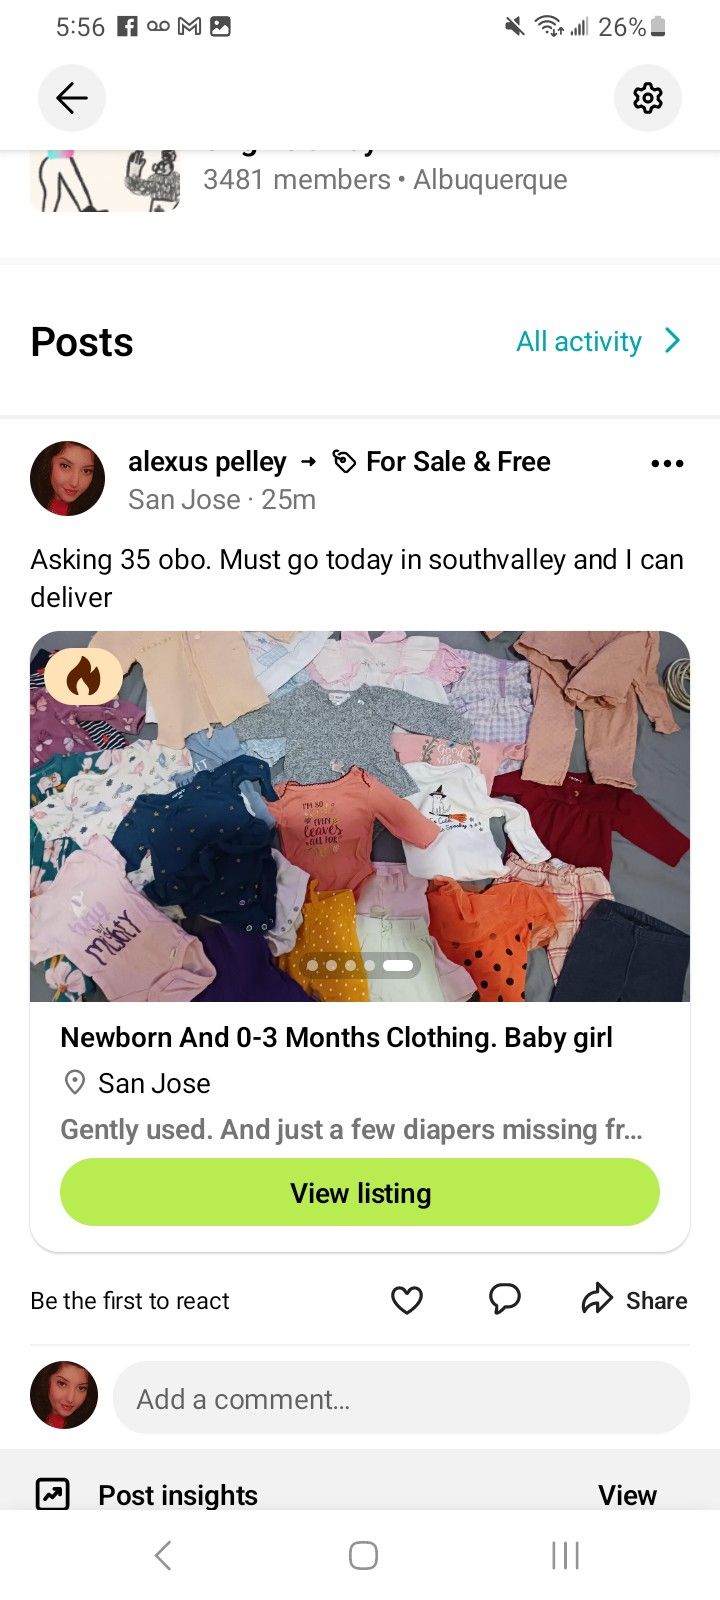 Newborn And 0-3 Month Clothes Baby girl. And 2 Packs Of Newborn Diapers 